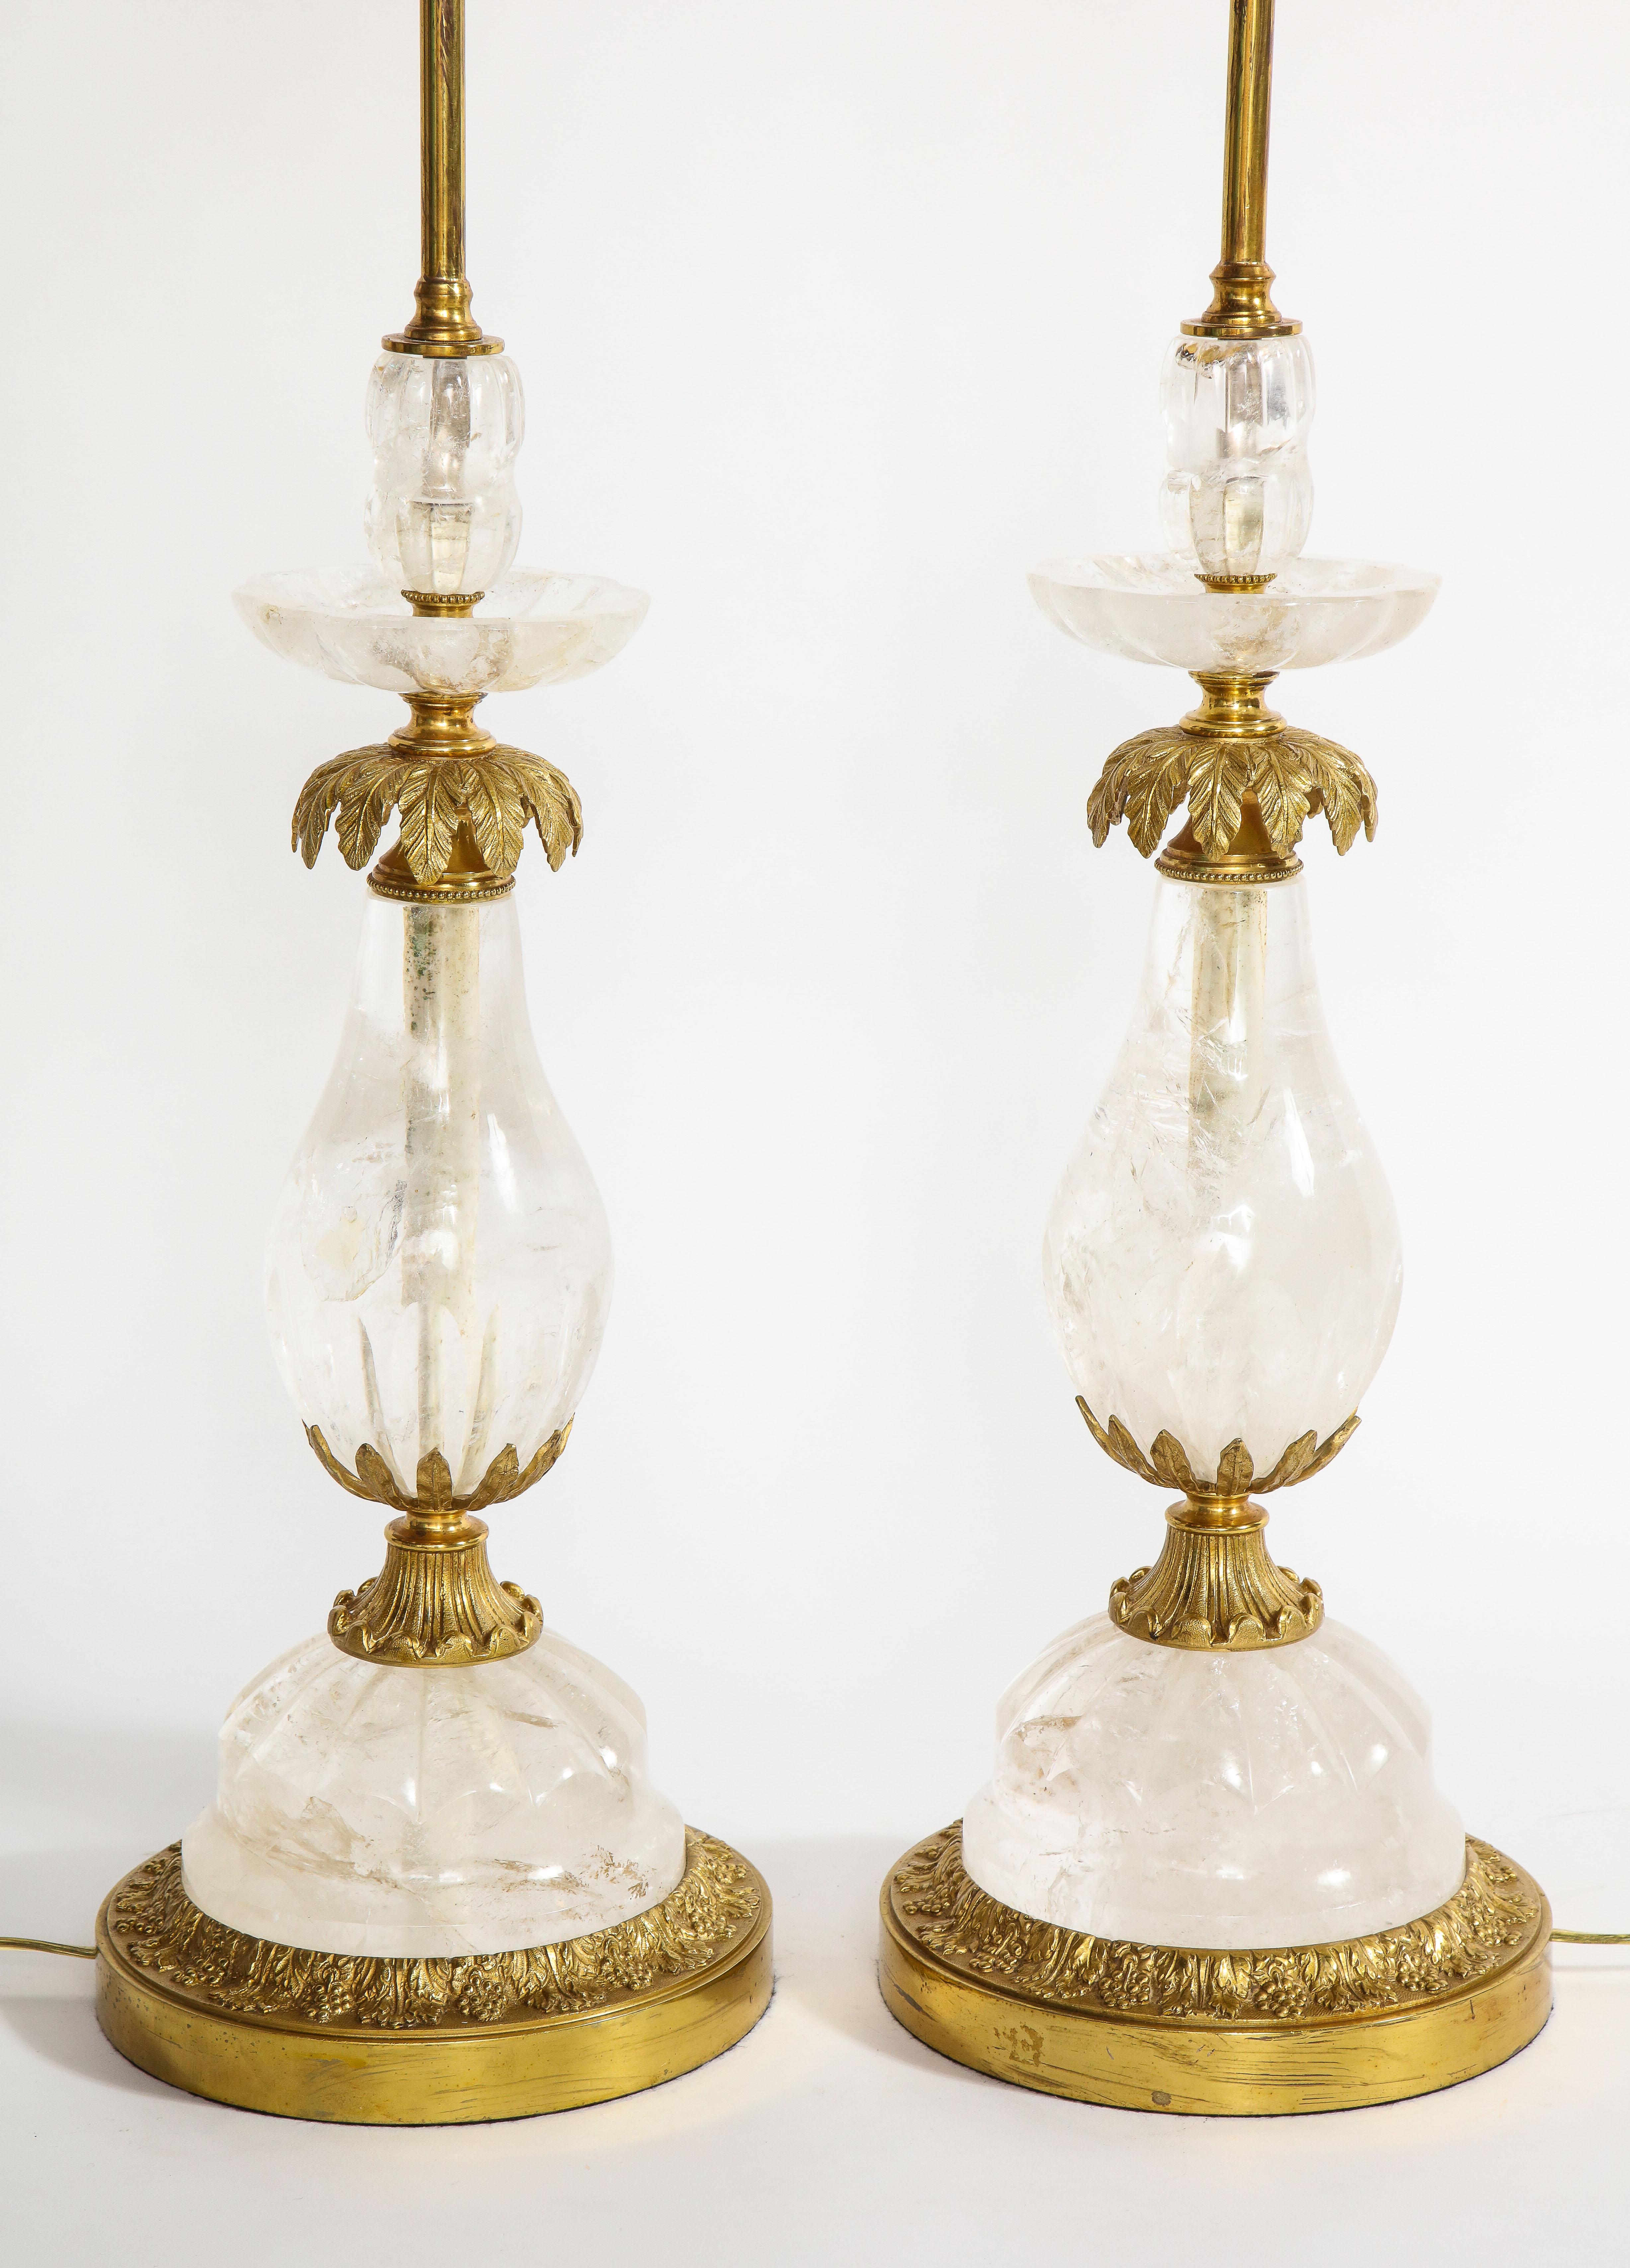 Pair of Art Deco Ormolu Mounted Palm Tree Form Rock Crystal Quartz Lamps For Sale 5